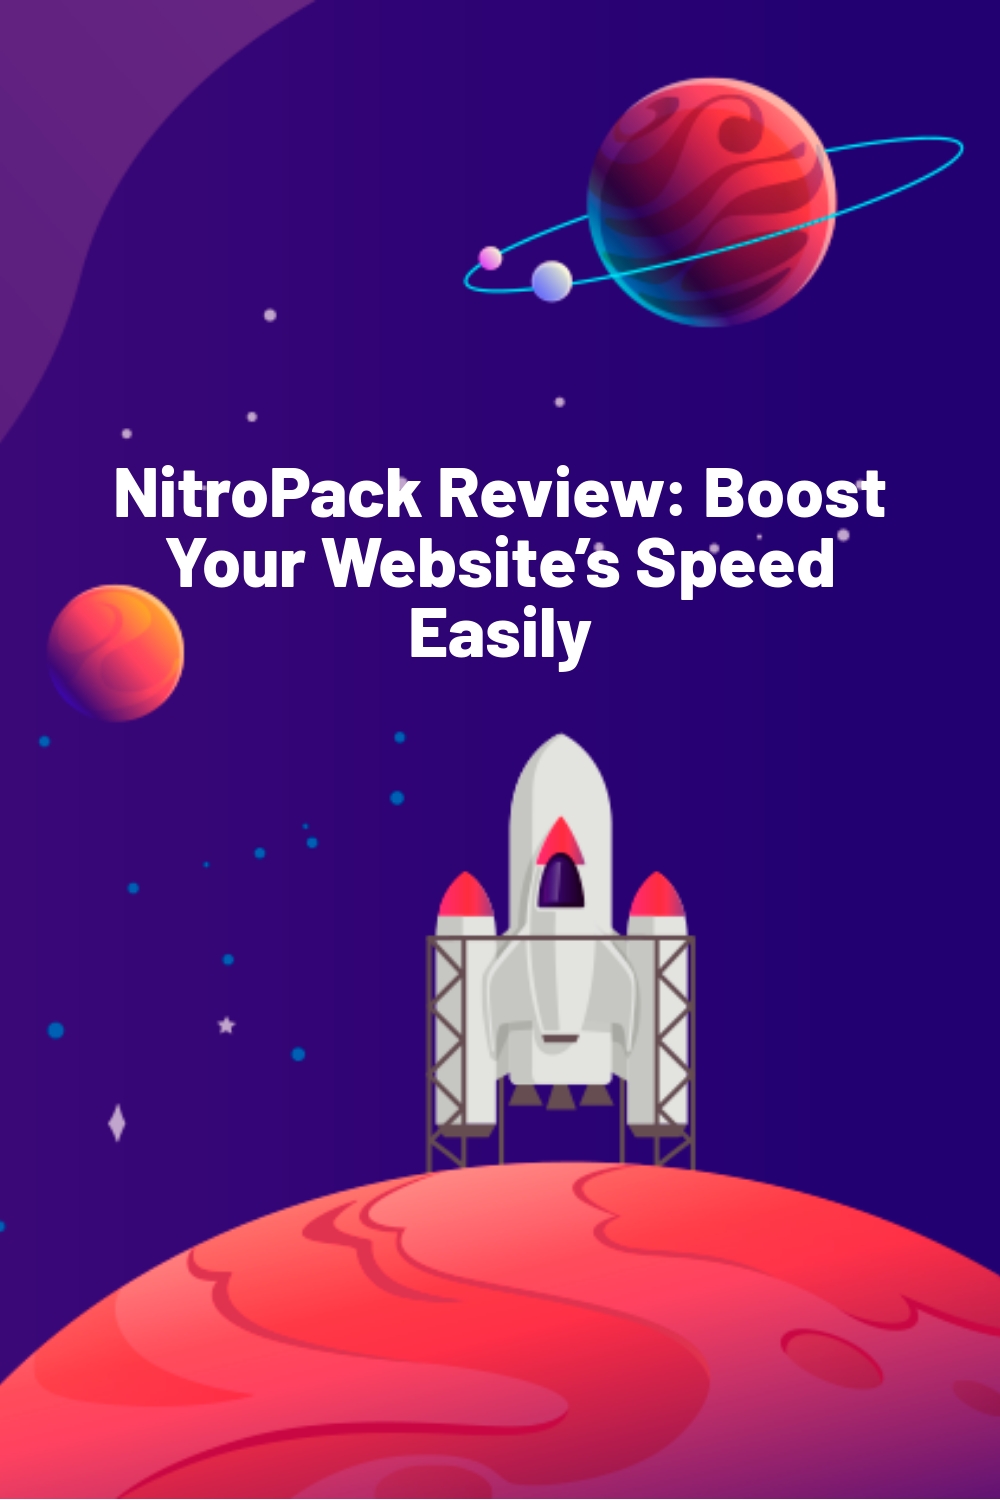 NitroPack Review: Boost Your Website’s Speed Easily